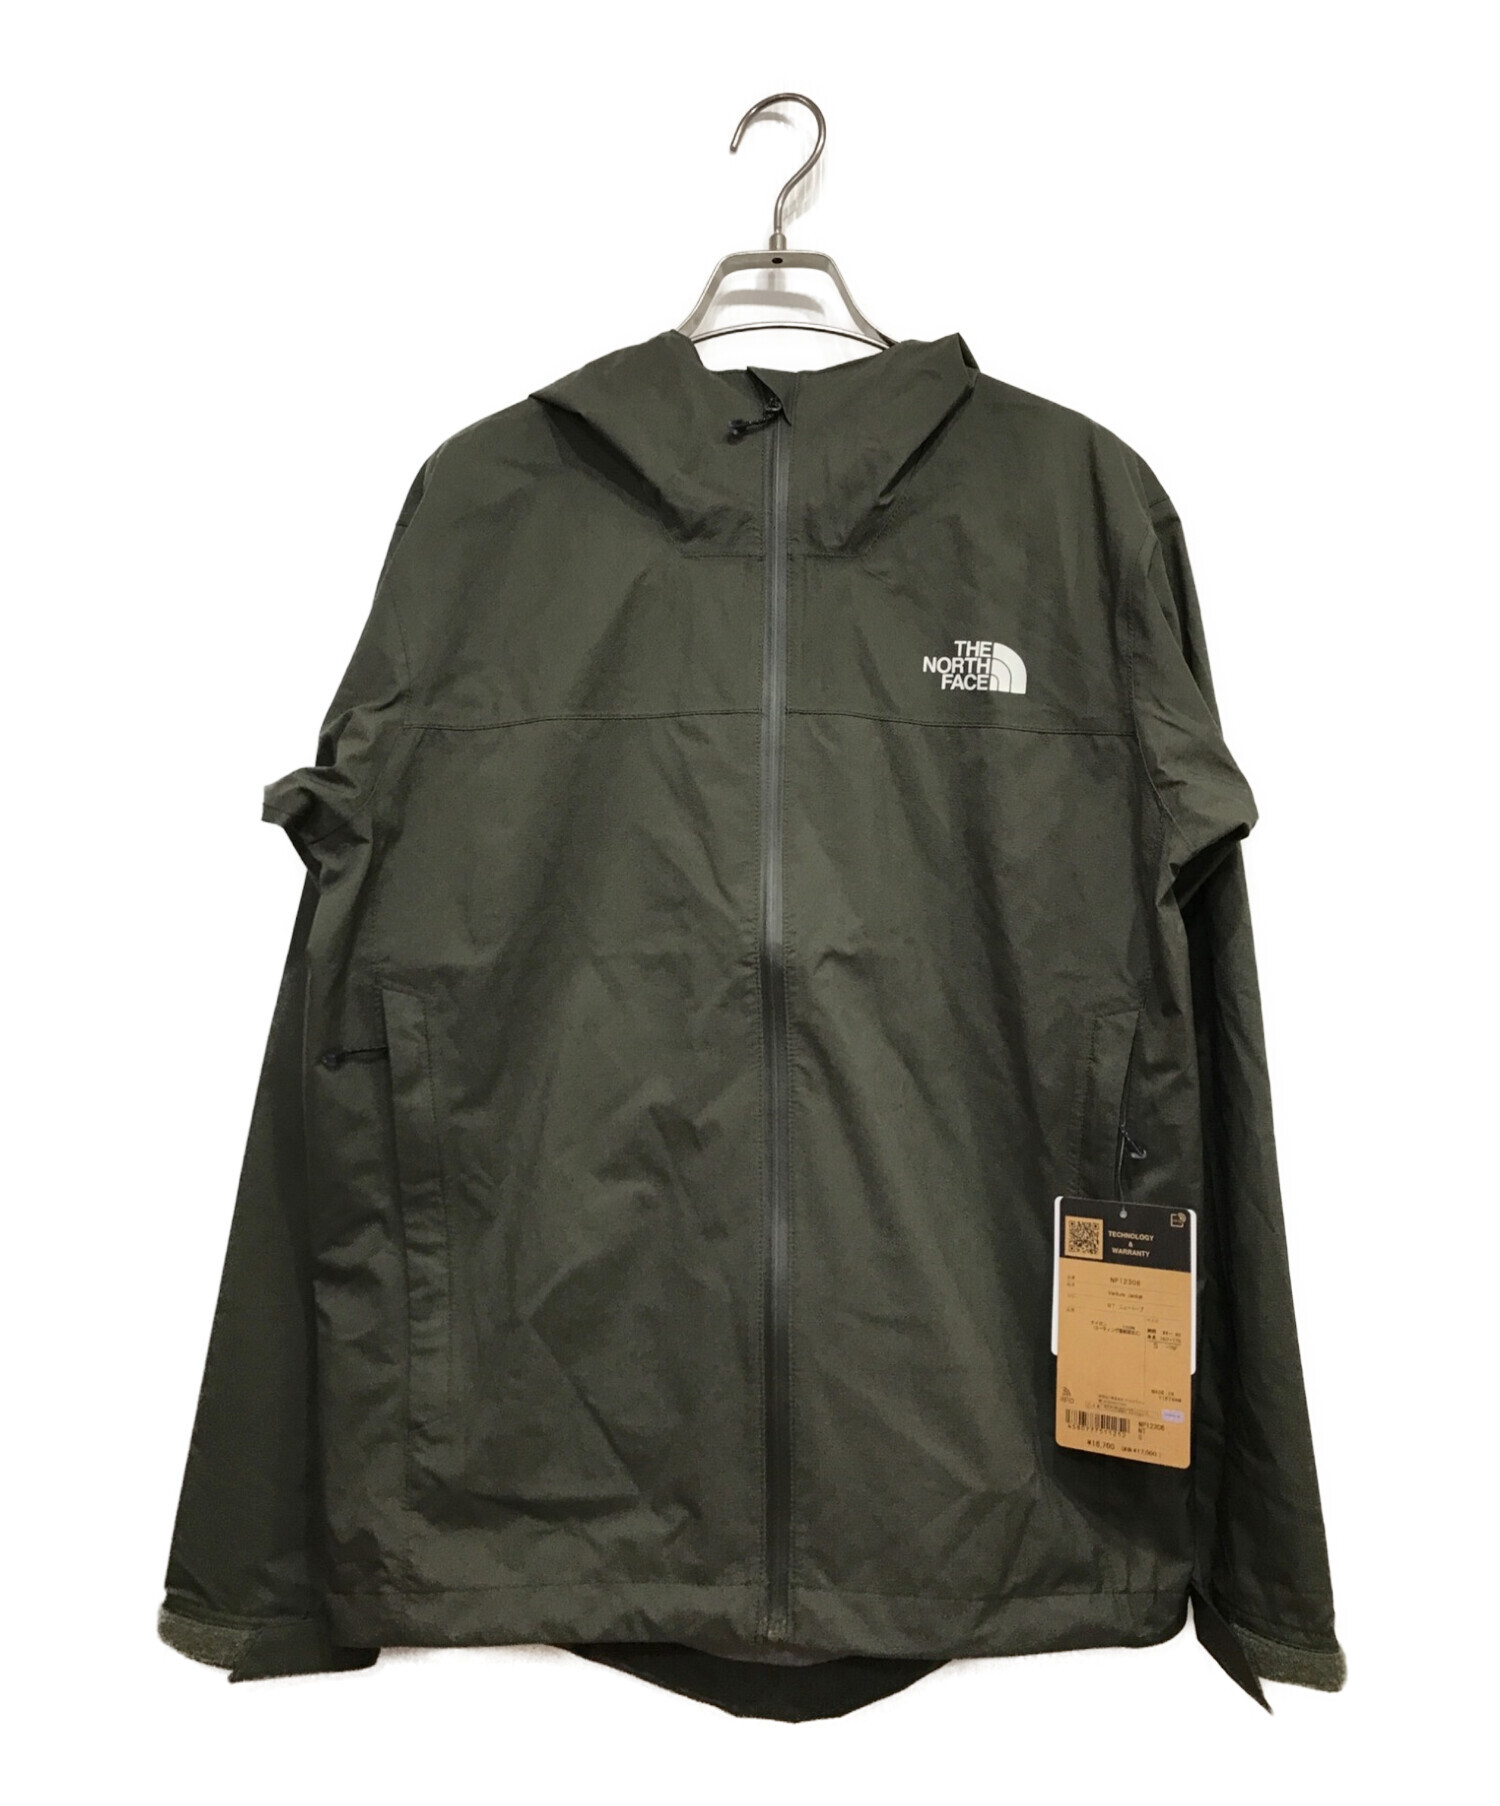 the north face venture jacket